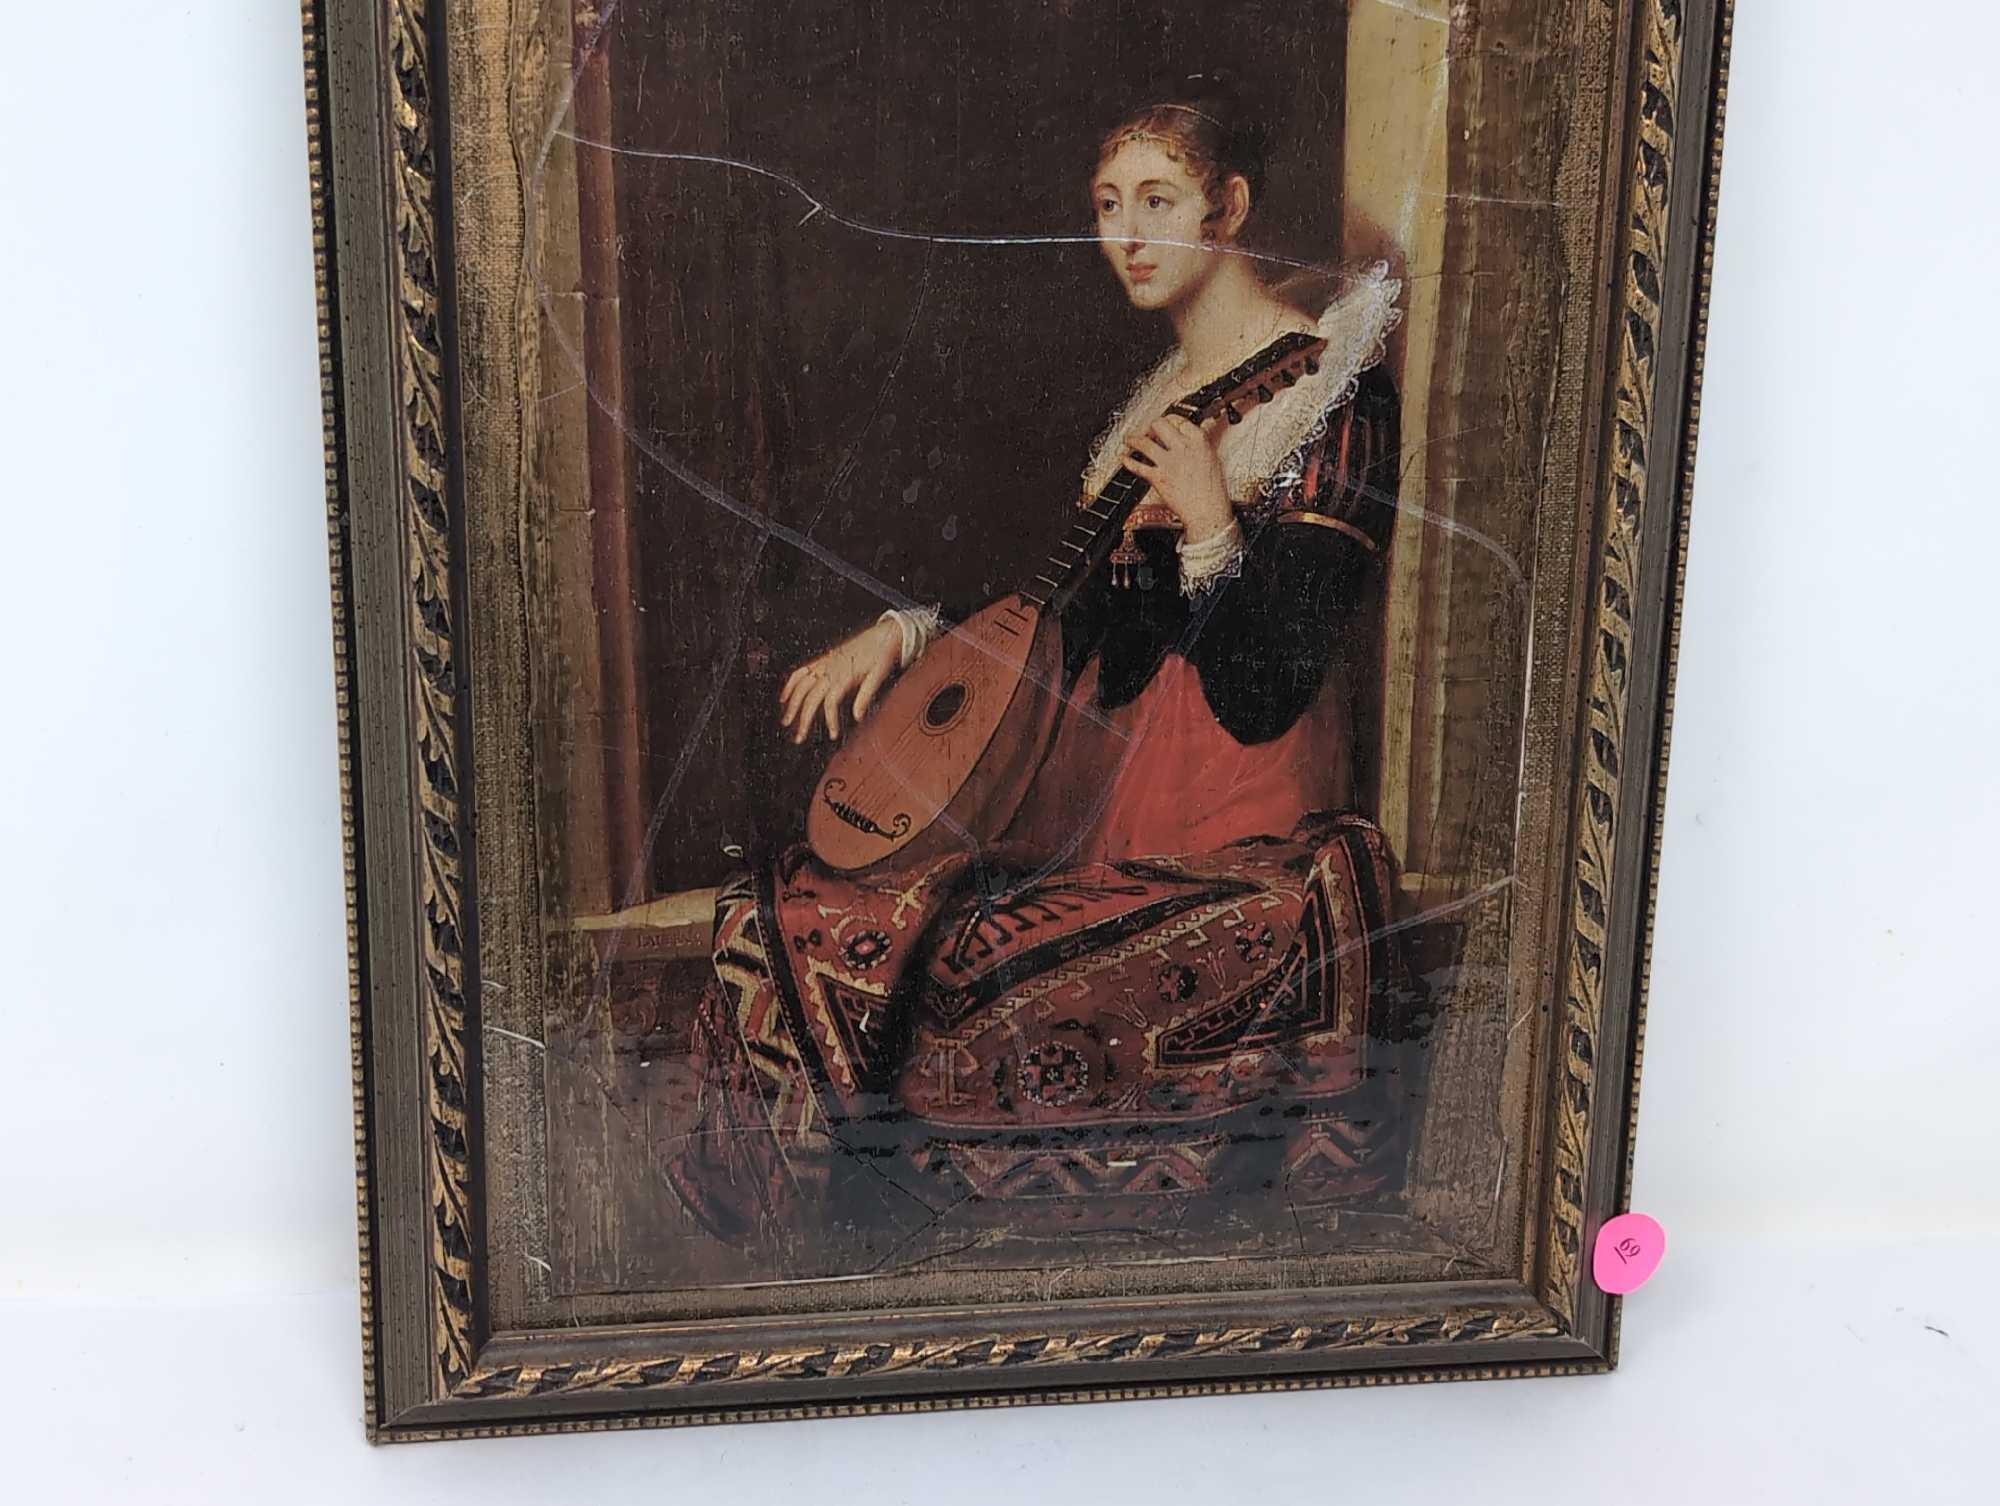 (FOYER) PAIR OF LAURENT RENAISSANCE FRENCH PRINTS DEPICTING A YOUNG GIRL/YOUNG BOY PLAYING MUSICAL